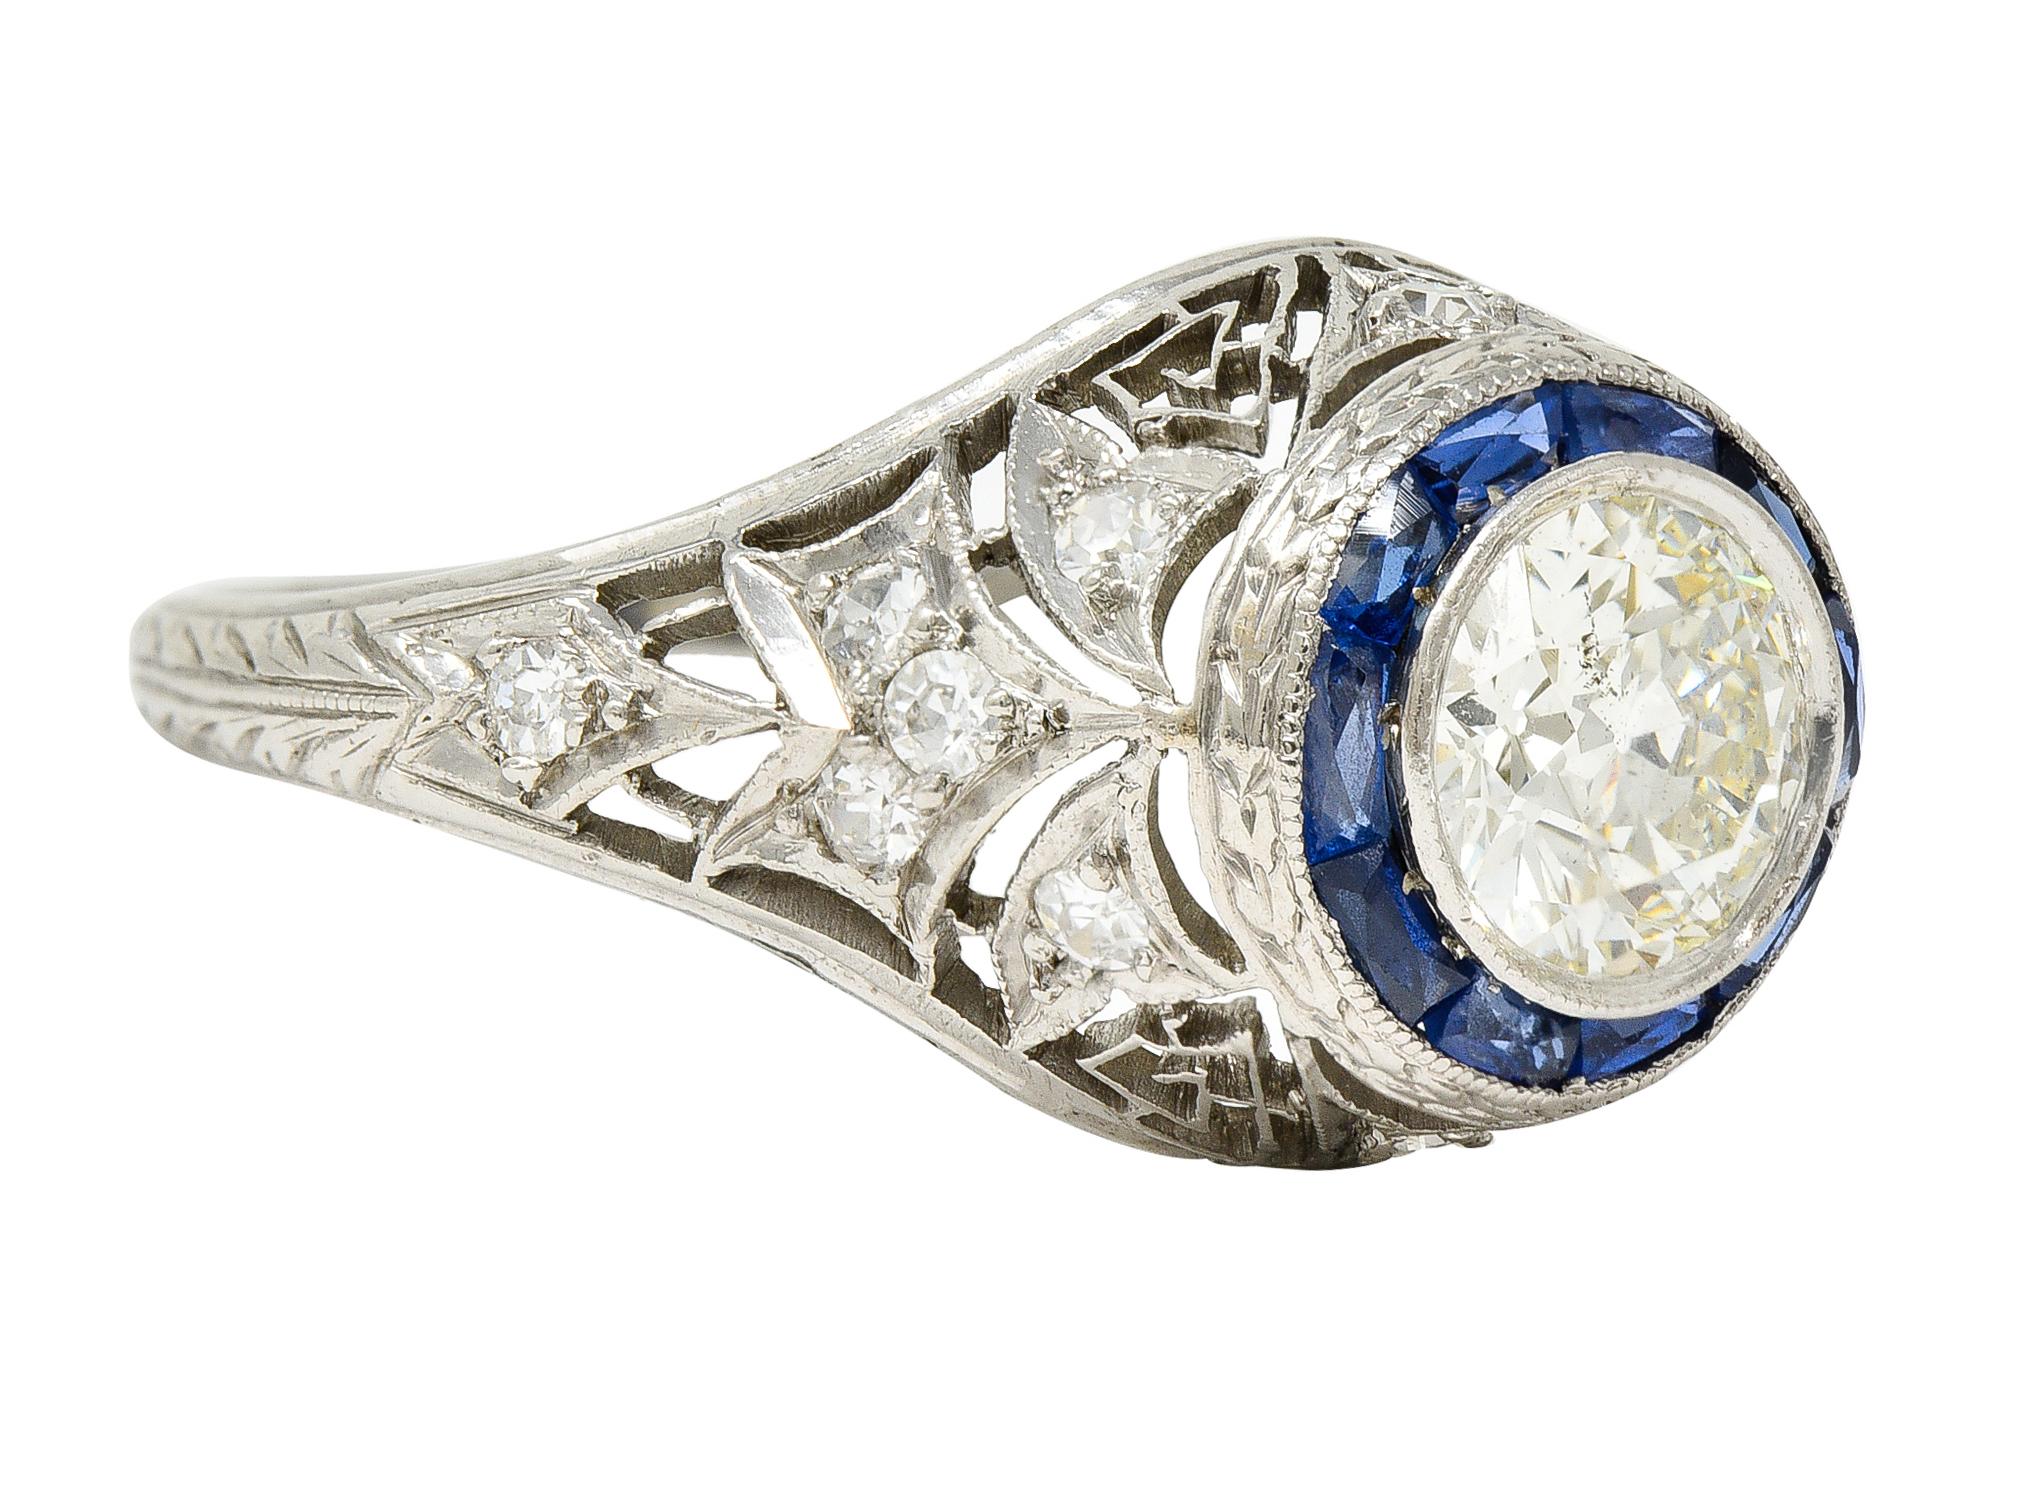 Centering an old European cut diamond weighing approximately 1.05 carats total - J color with SI2 clarity. Bezel set with a recessed French cut synthetic sapphire halo surround - channel set. Transparent medium blue in color - with an engraved wheat